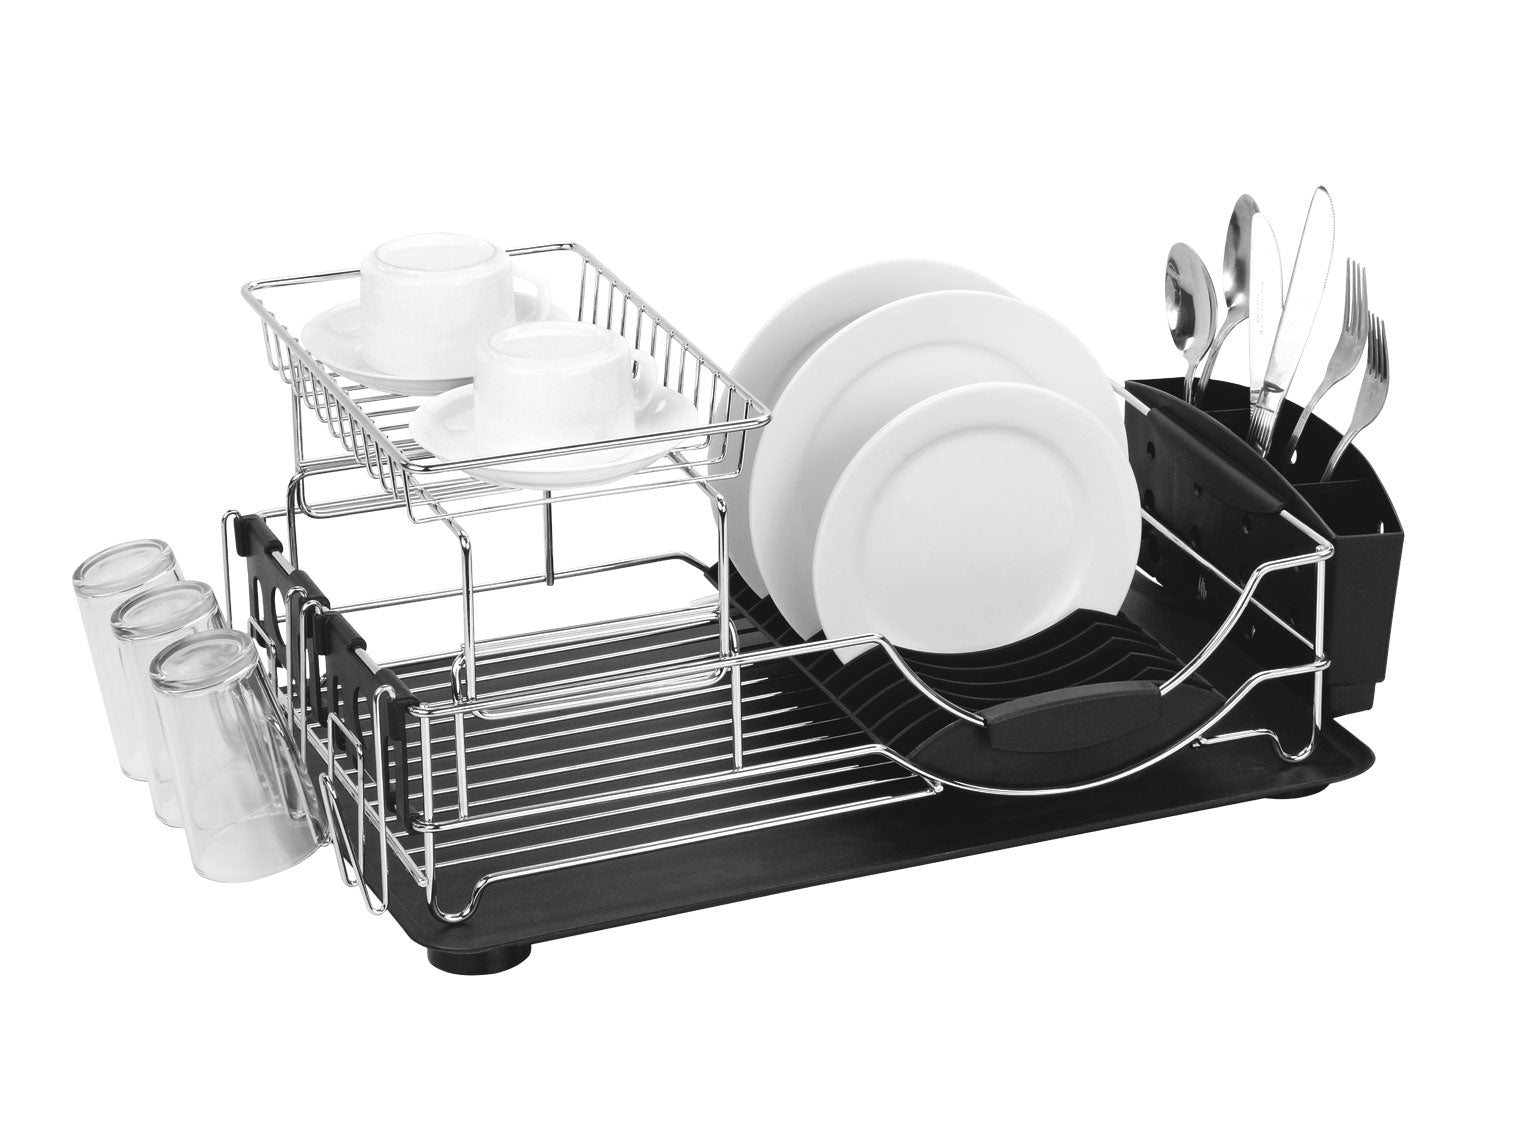 Home Basics 2 Tier Deluxe Chrome Dish Rack Drainer, Black, 20x13x10 Inches